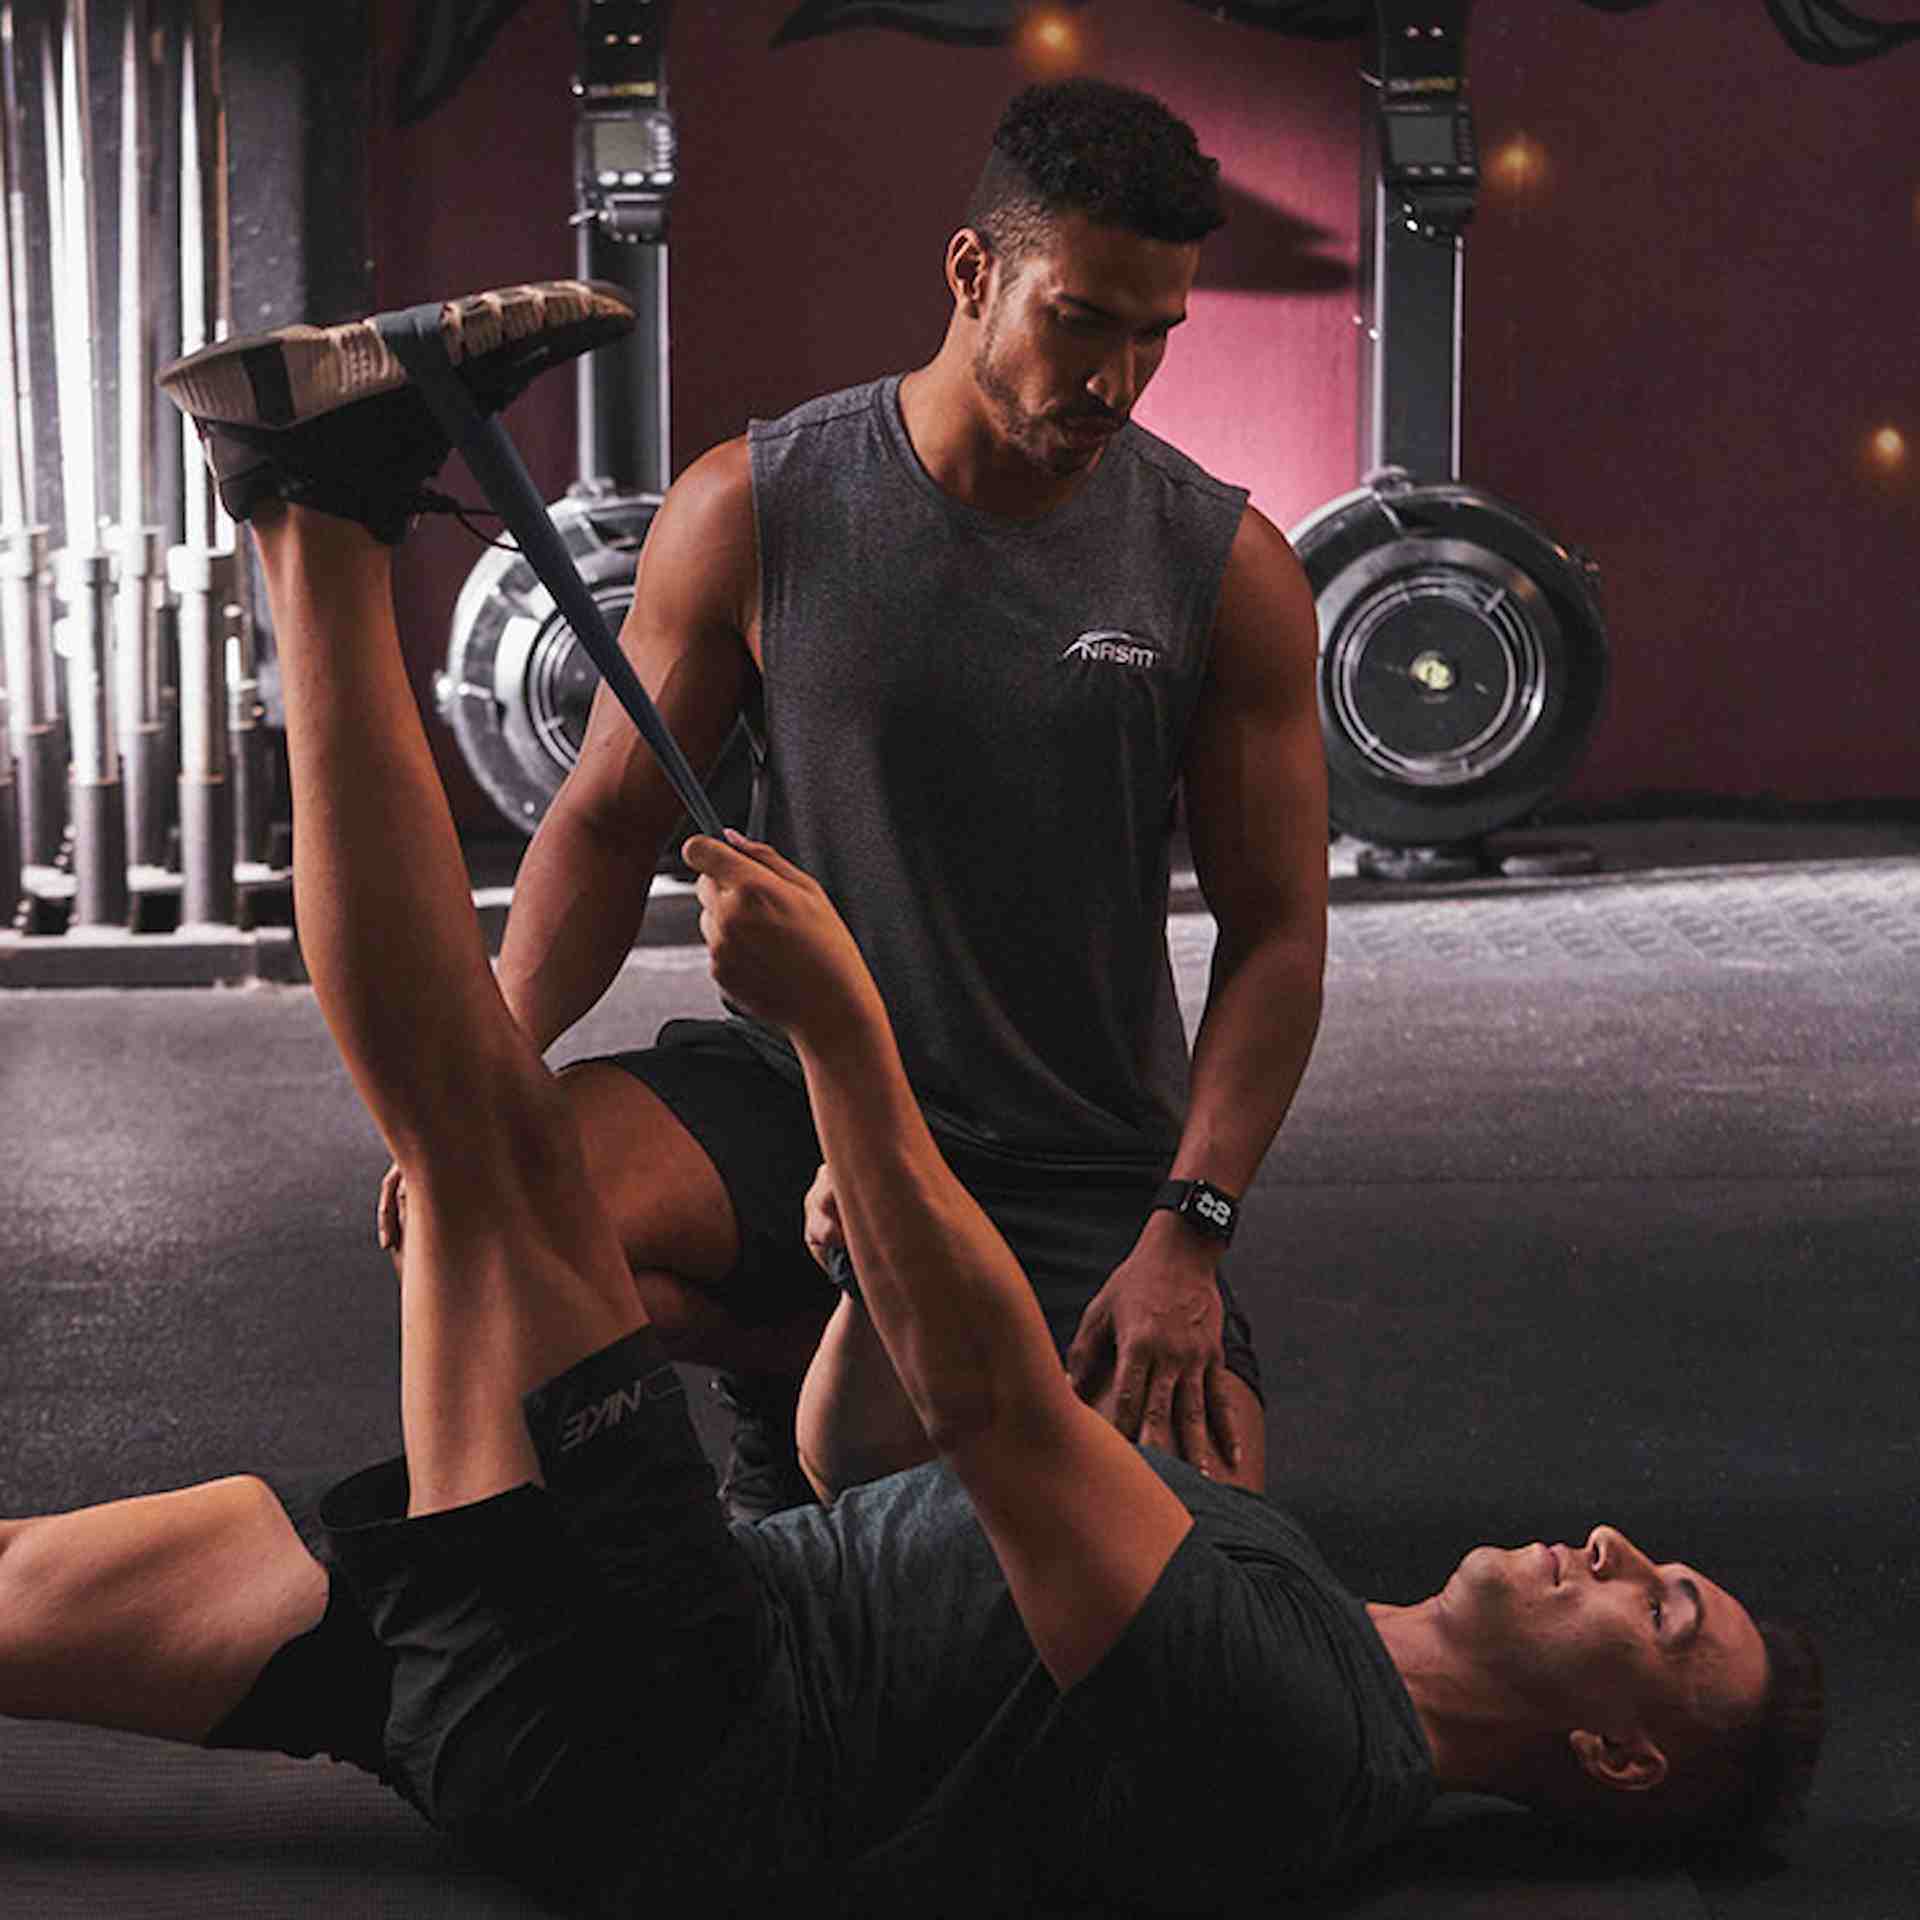 Male NASM trainer assisting male client on full leg stretch with band